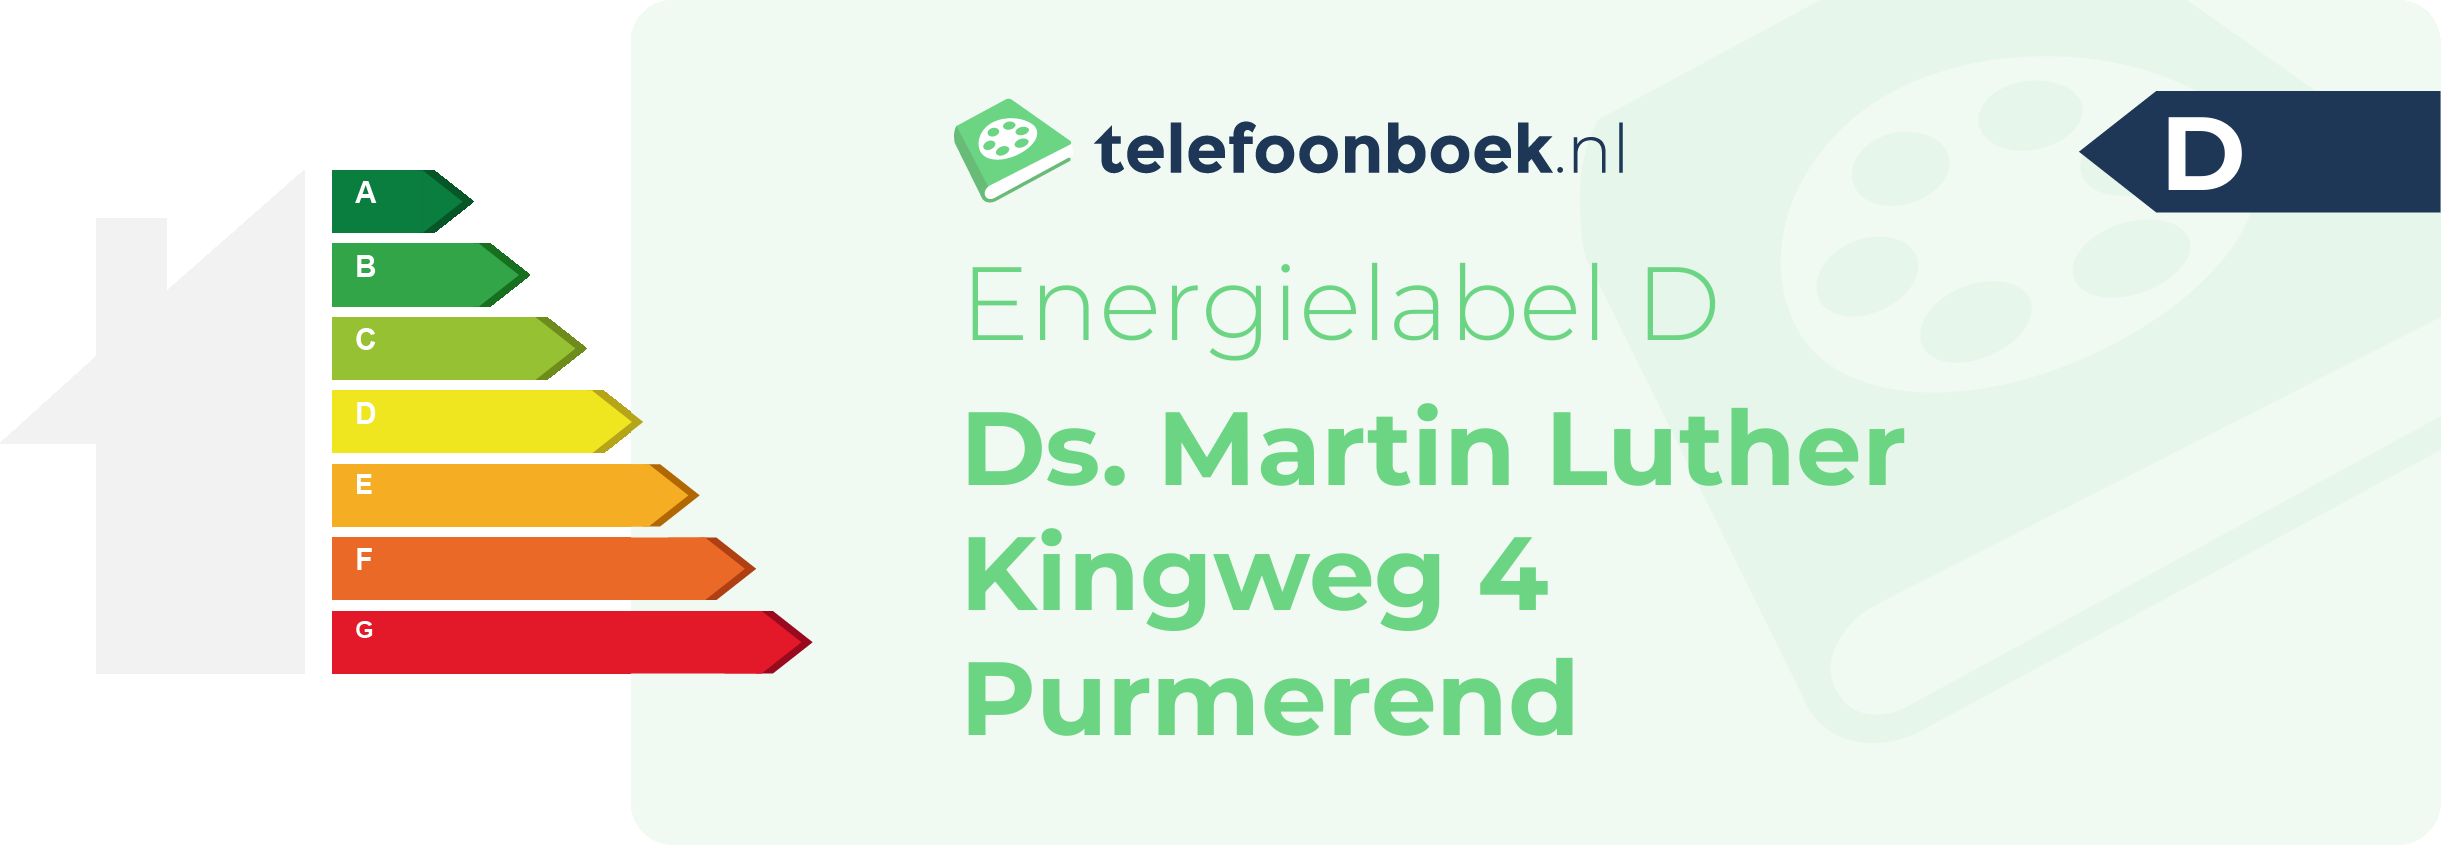 Energielabel Ds. Martin Luther Kingweg 4 Purmerend